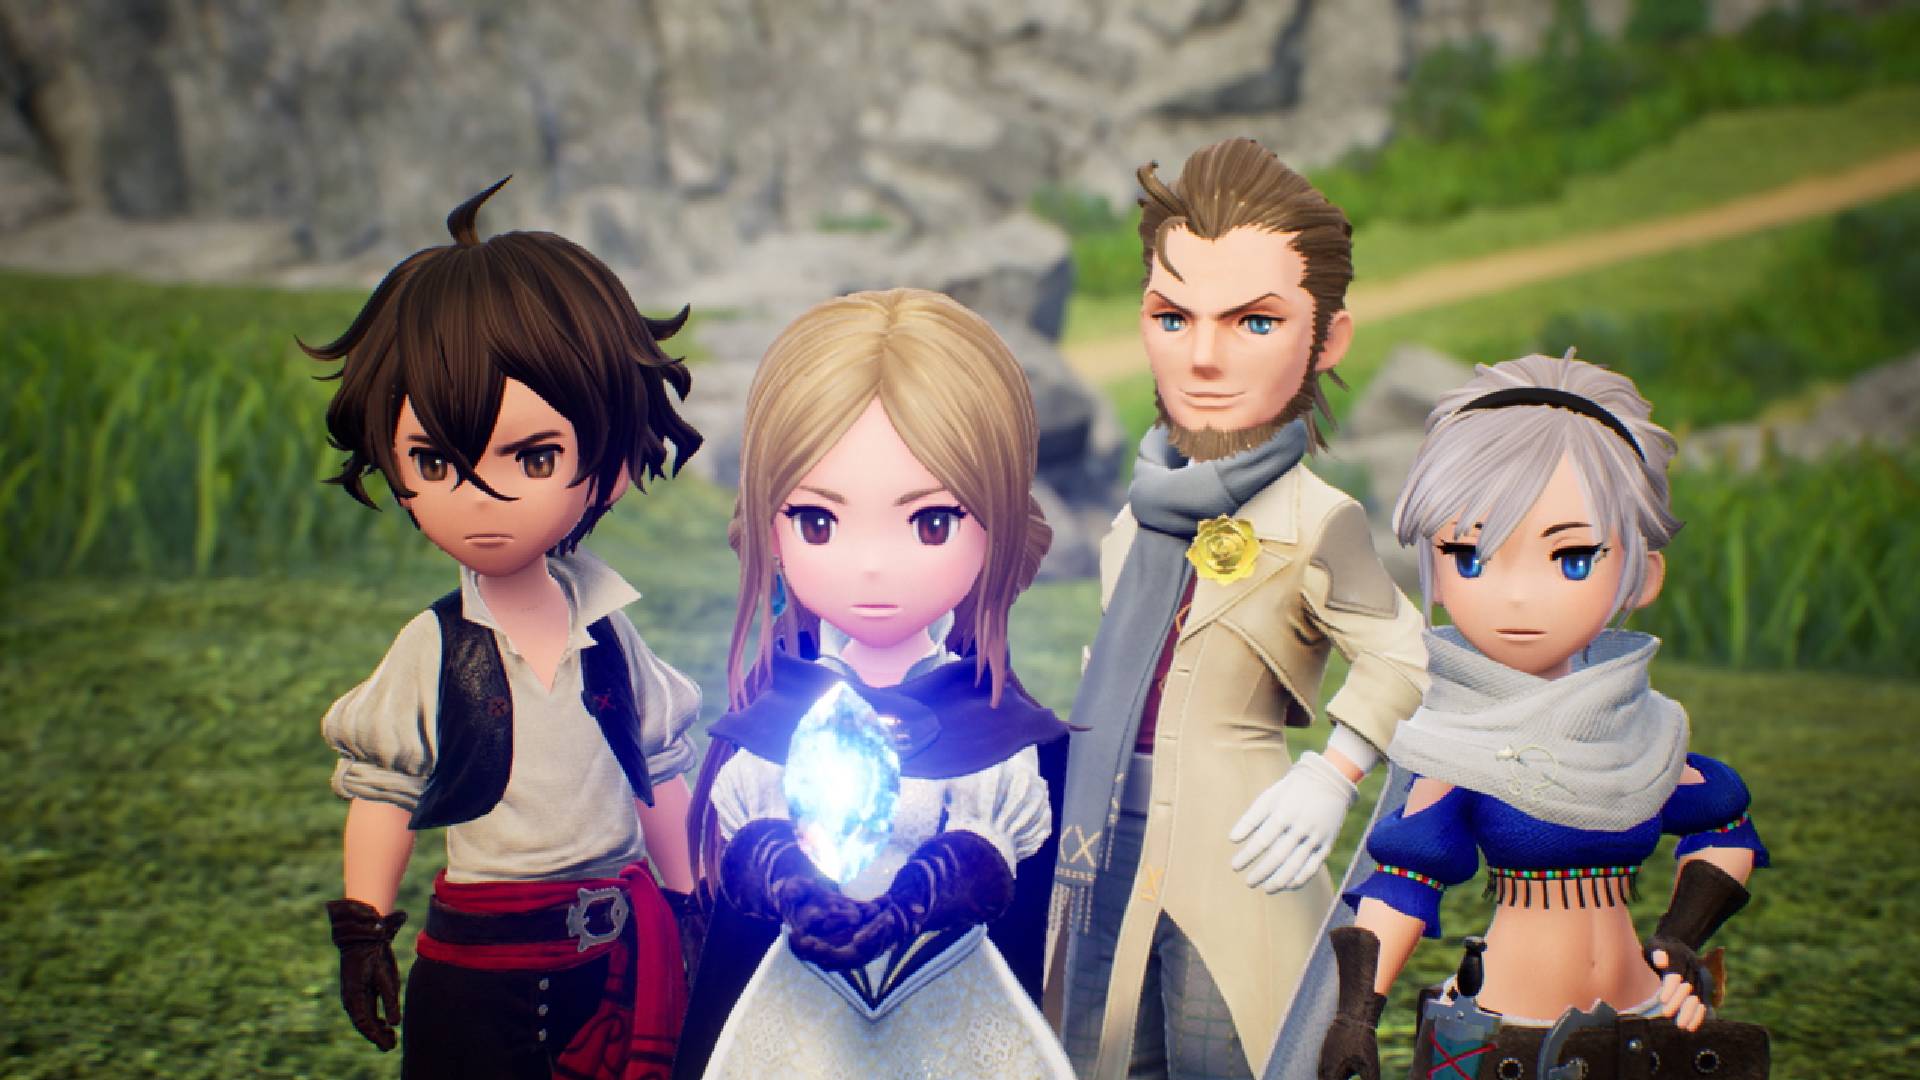 Be brave and try a new game, with 50% off Bravely Default II